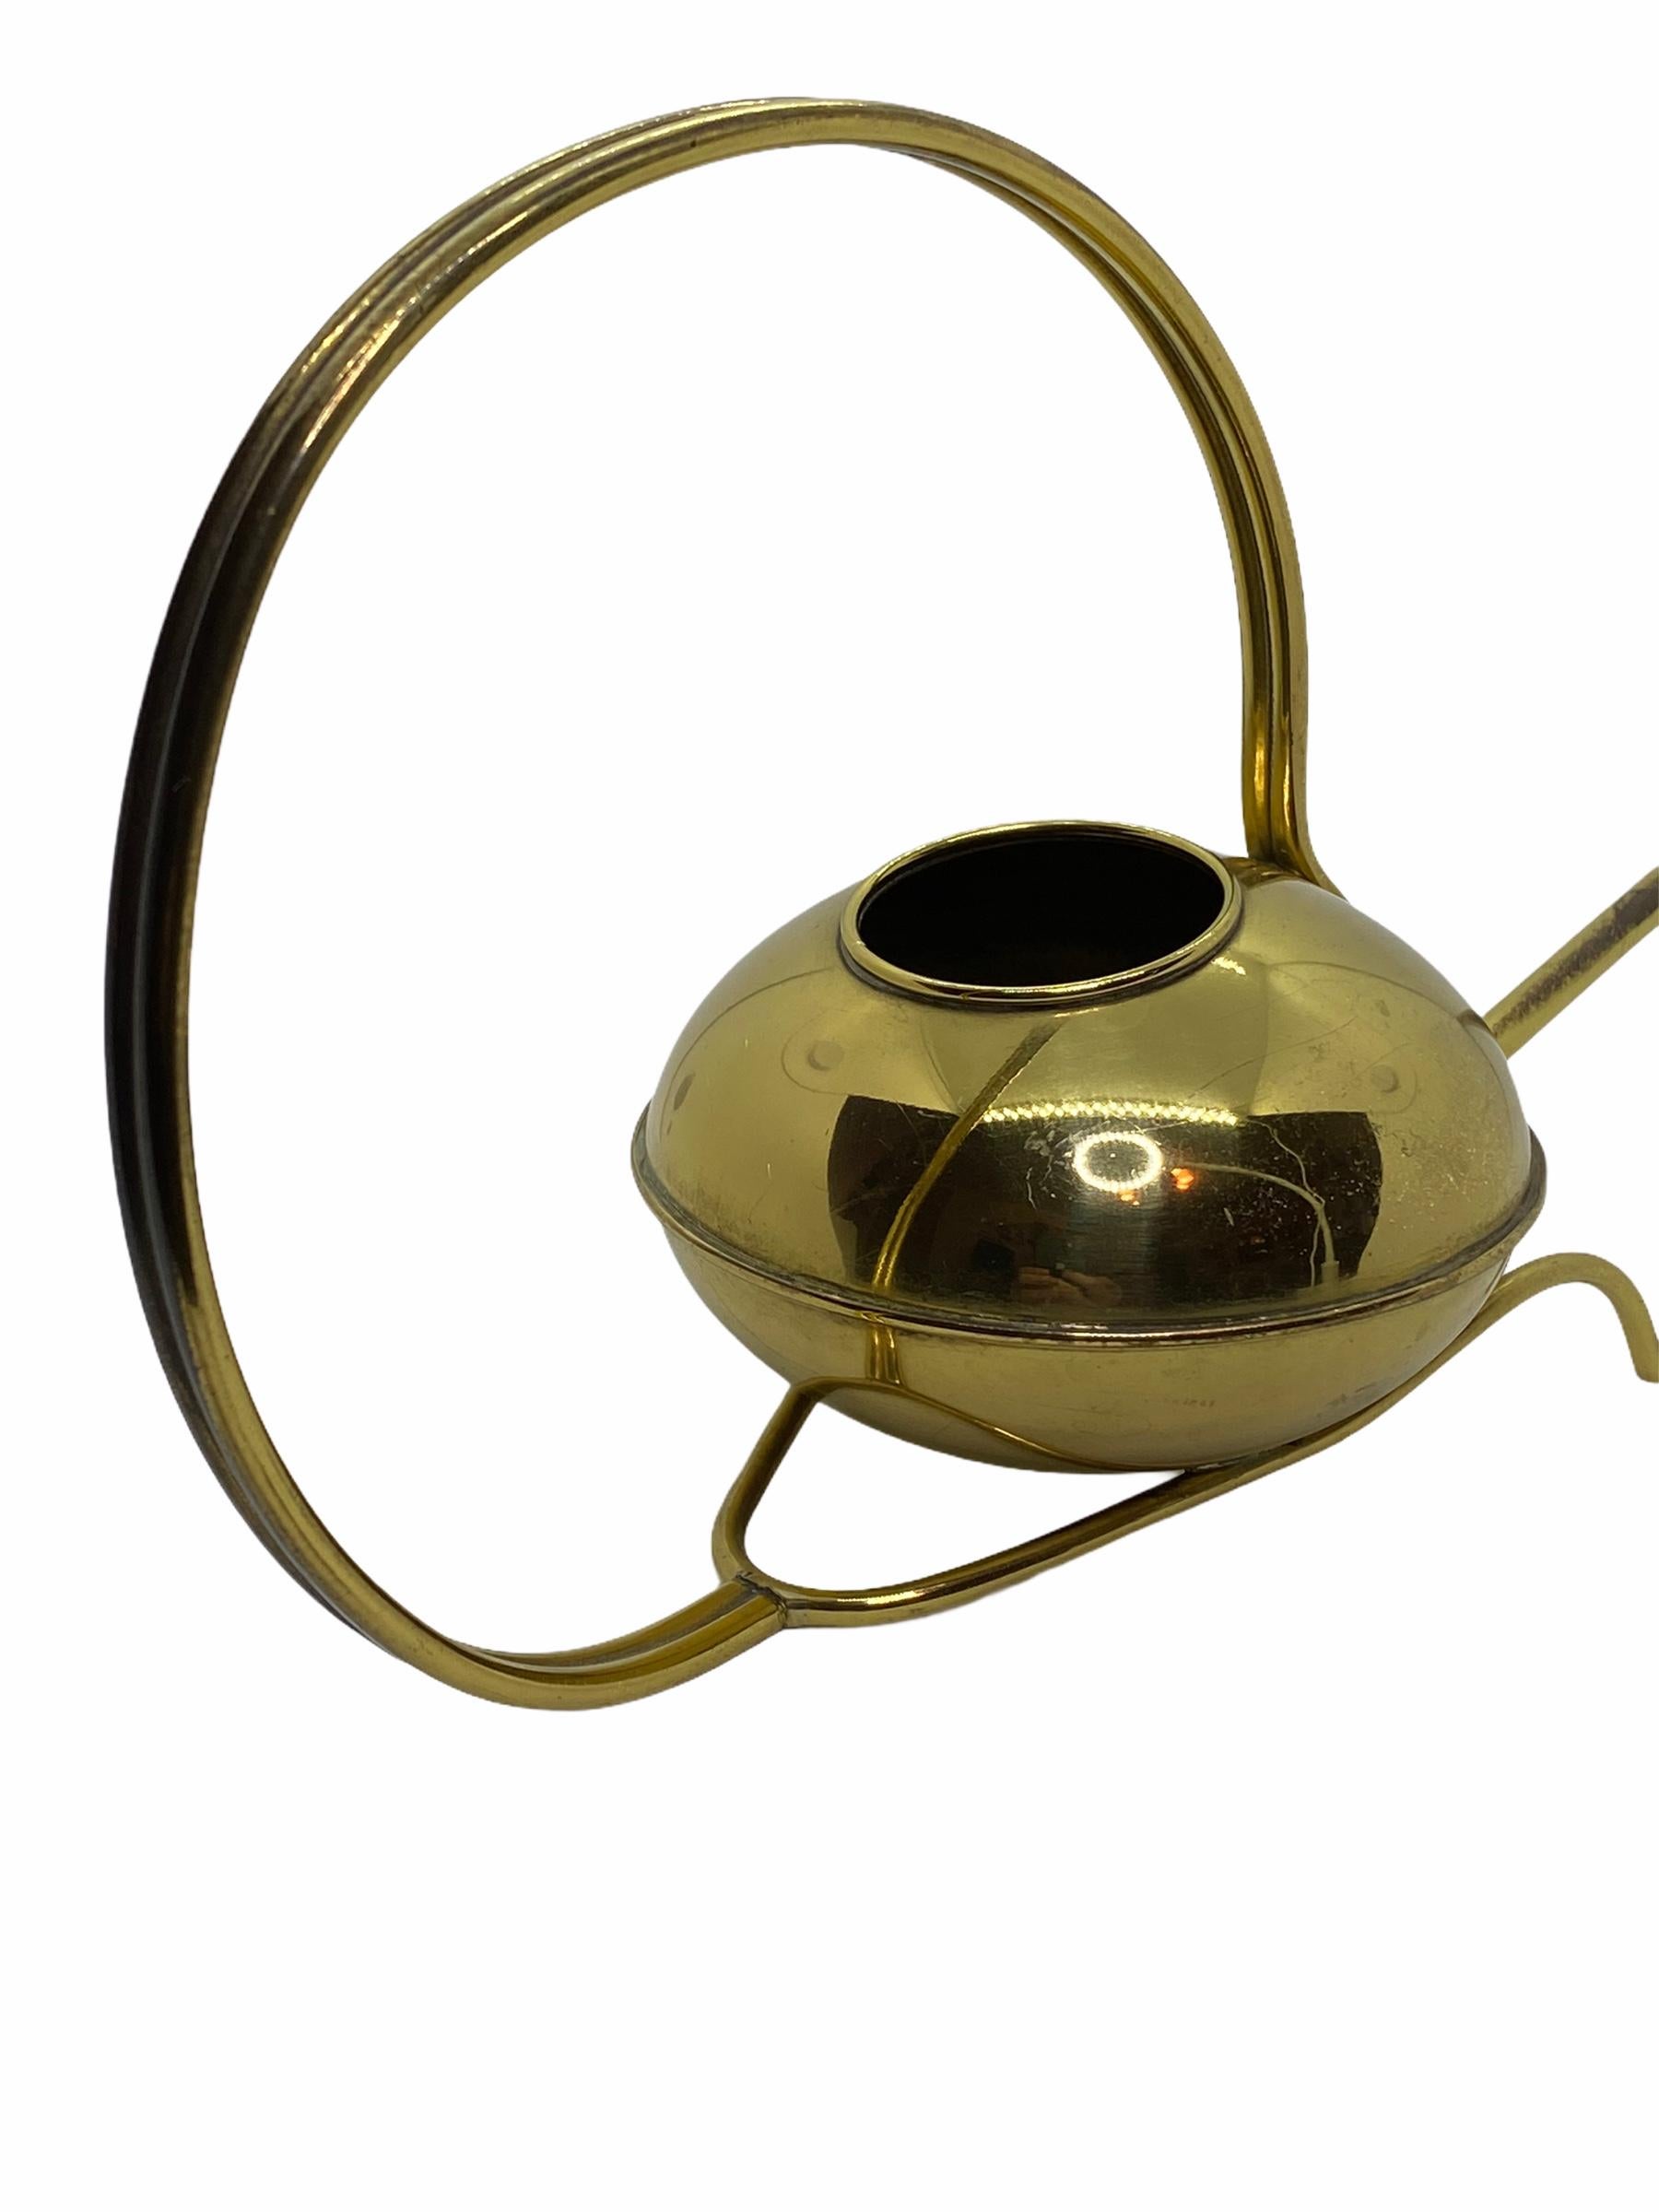 Hand-Crafted Vintage Mid-Century Modern Brass Bonsai Watering Can with Long Spout, 1960s For Sale